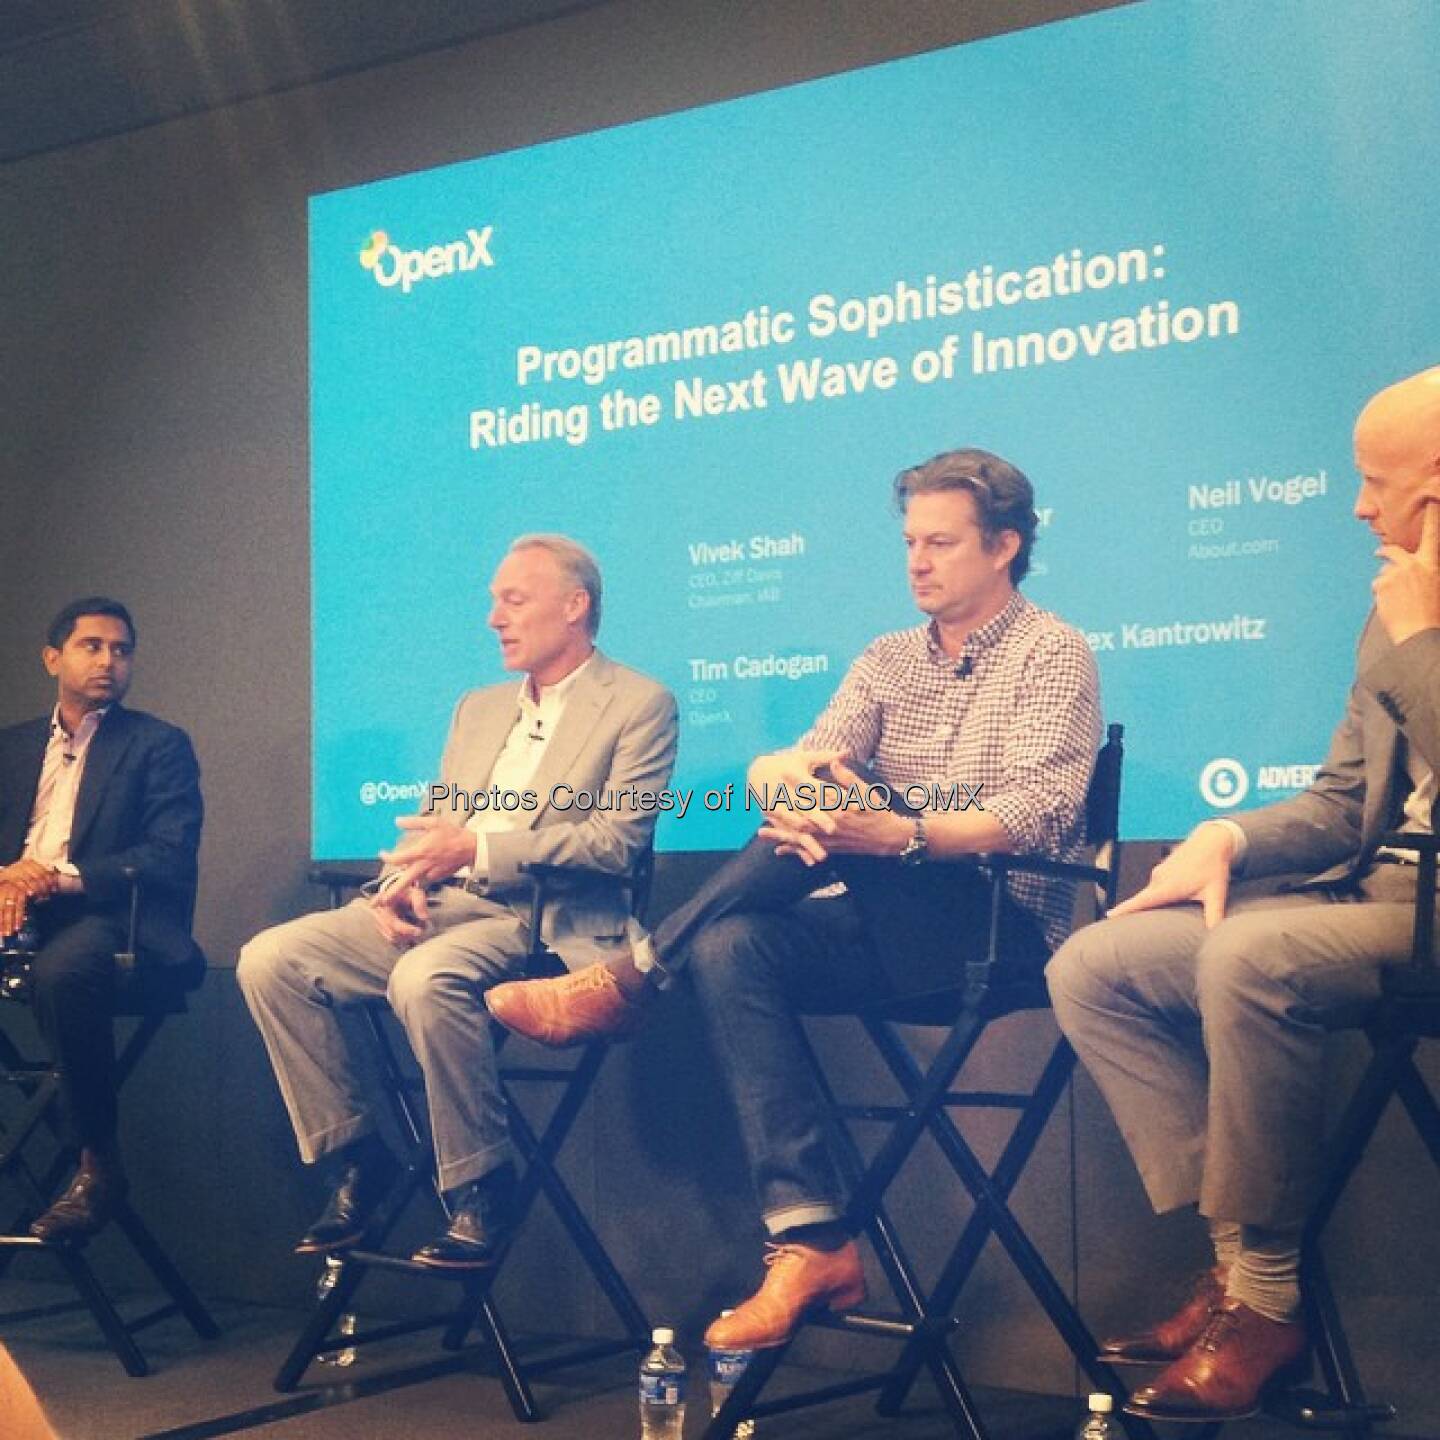 Discussing The next wave of innovation in Ad technology here at #Adweek. @advertisingweek  Source: http://facebook.com/NASDAQ